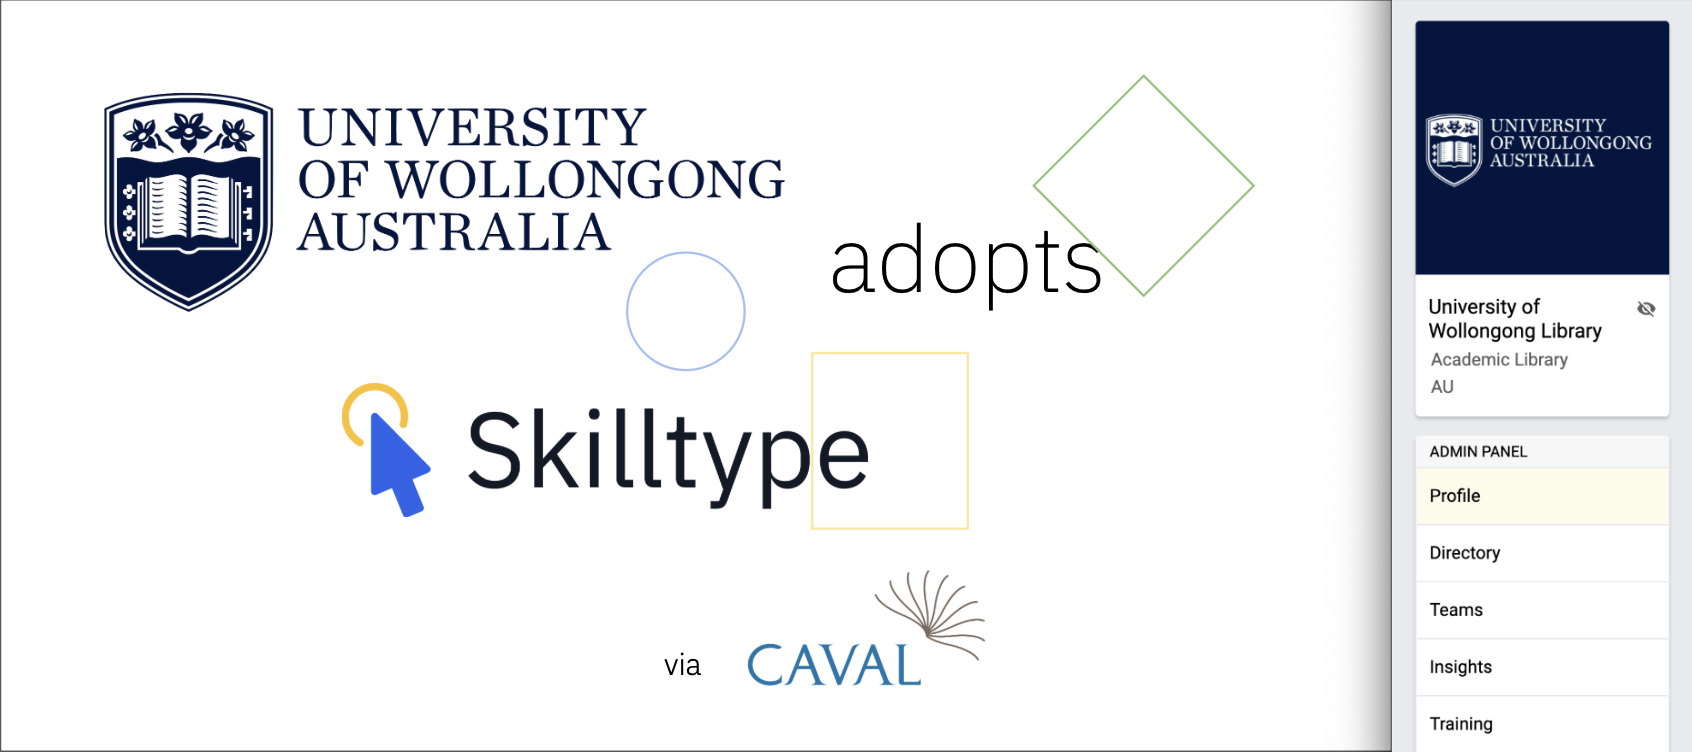 University of Wollongong Libraries Becomes First Library in Australia to Adopt Skilltype